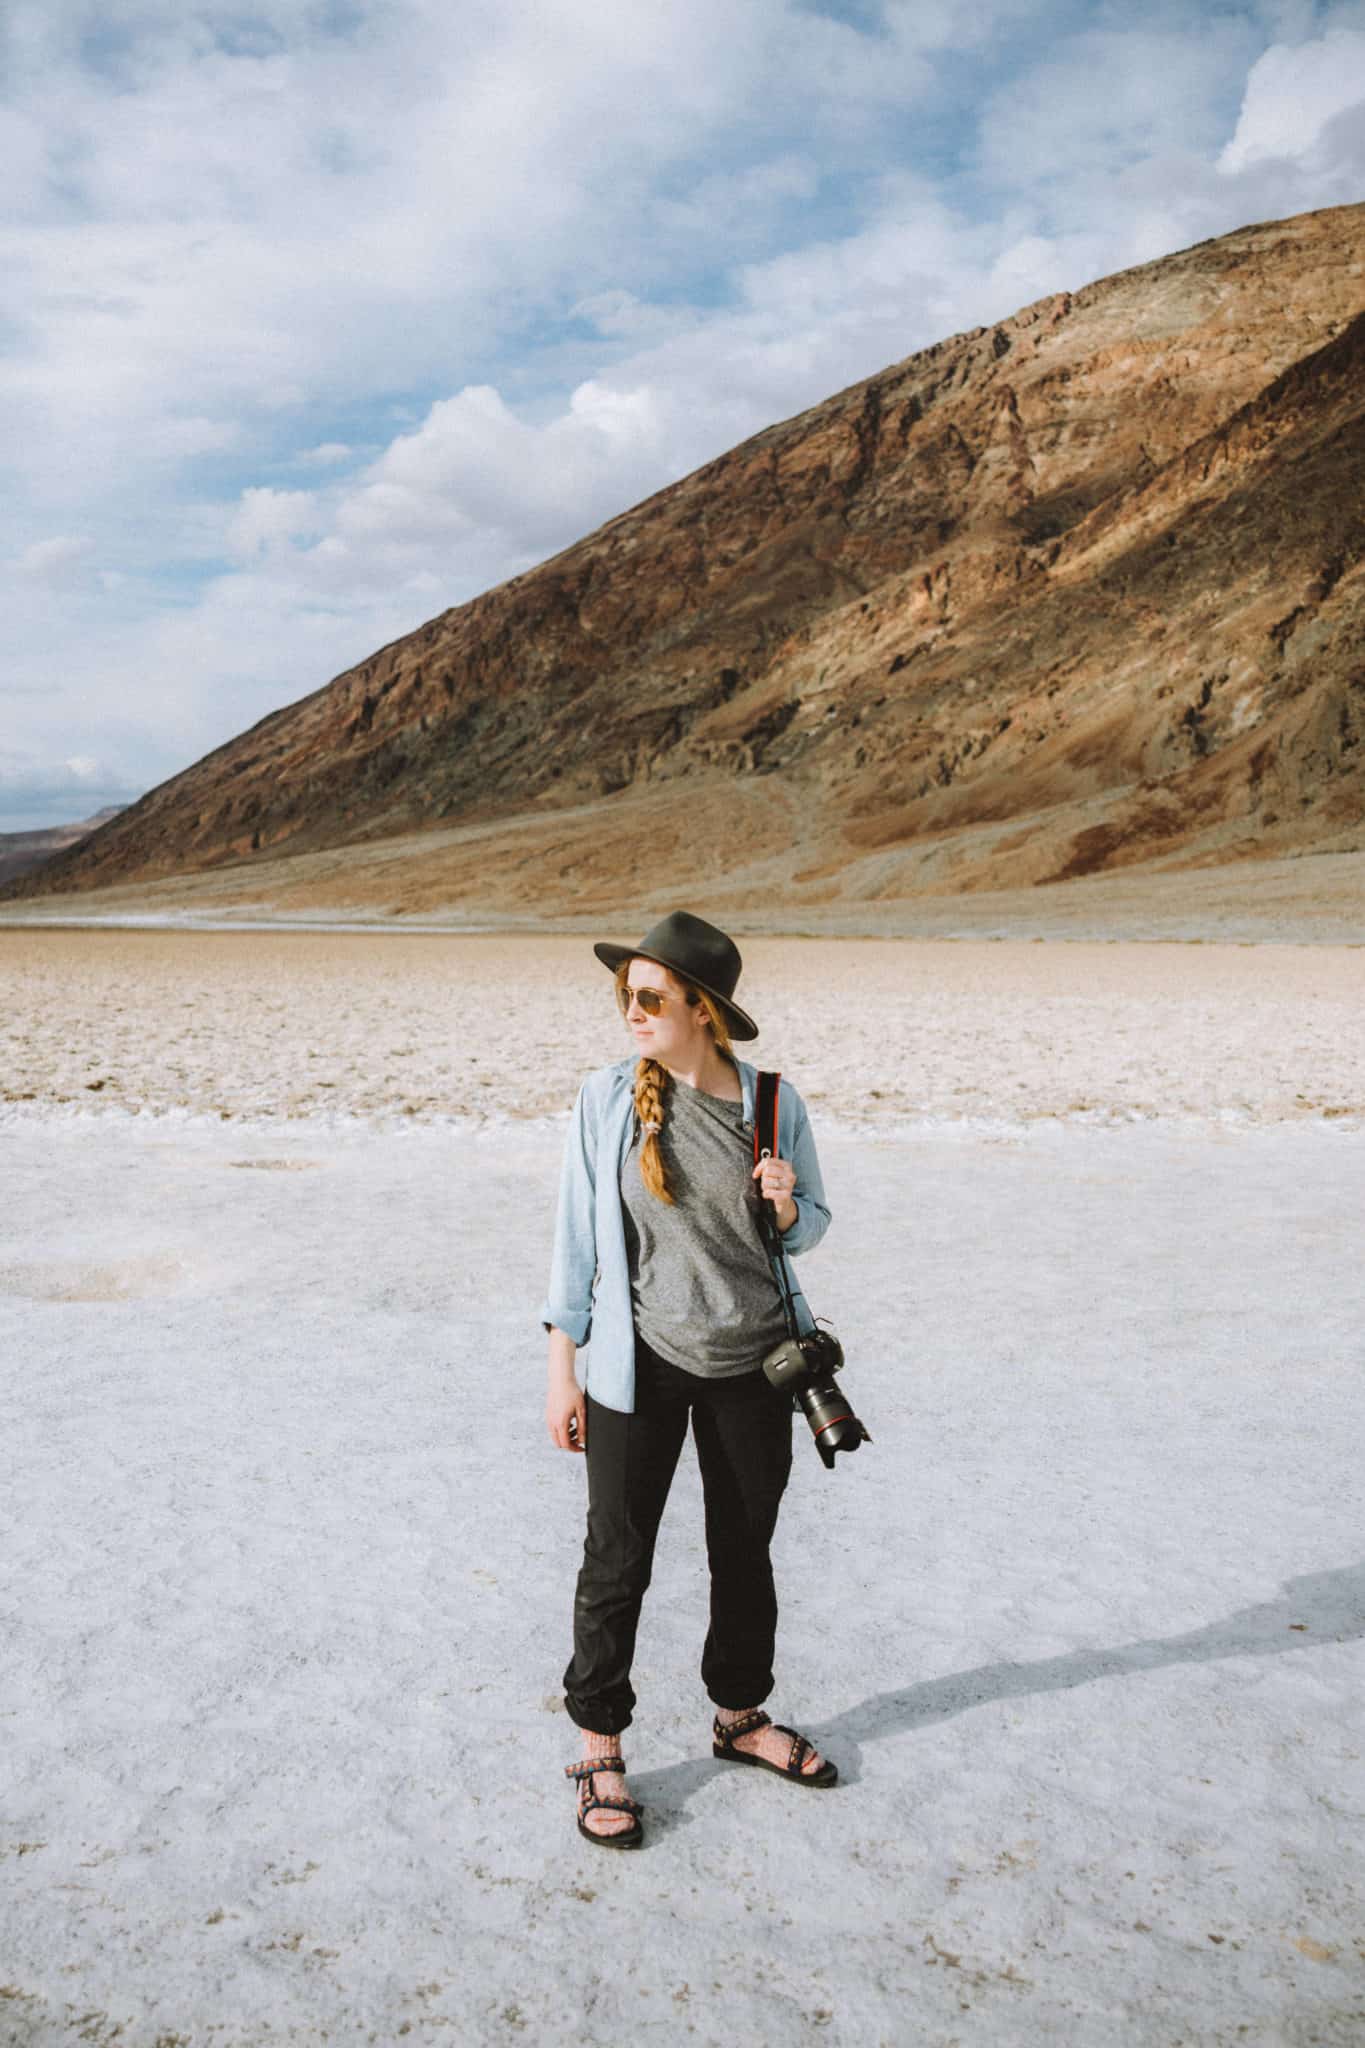 Emily Mandagie standing at Badwater Basin - Death Valley